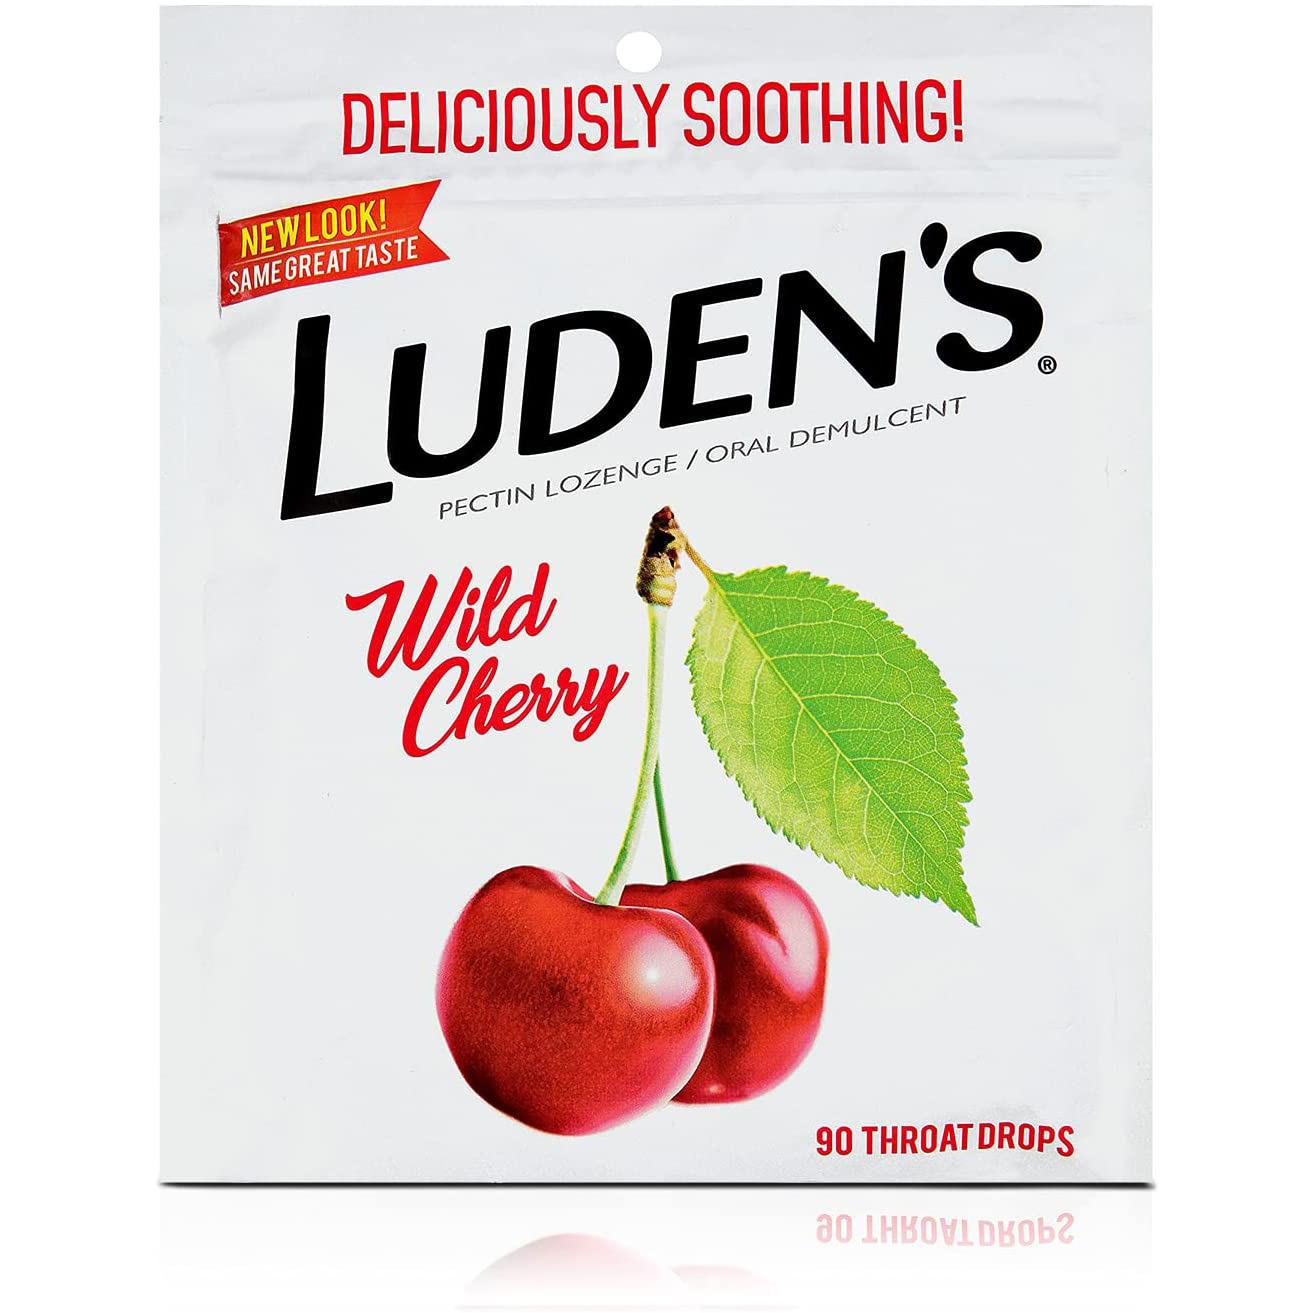 90 Ludens Wild Cherry Throat Drops for $2.98 Shipped